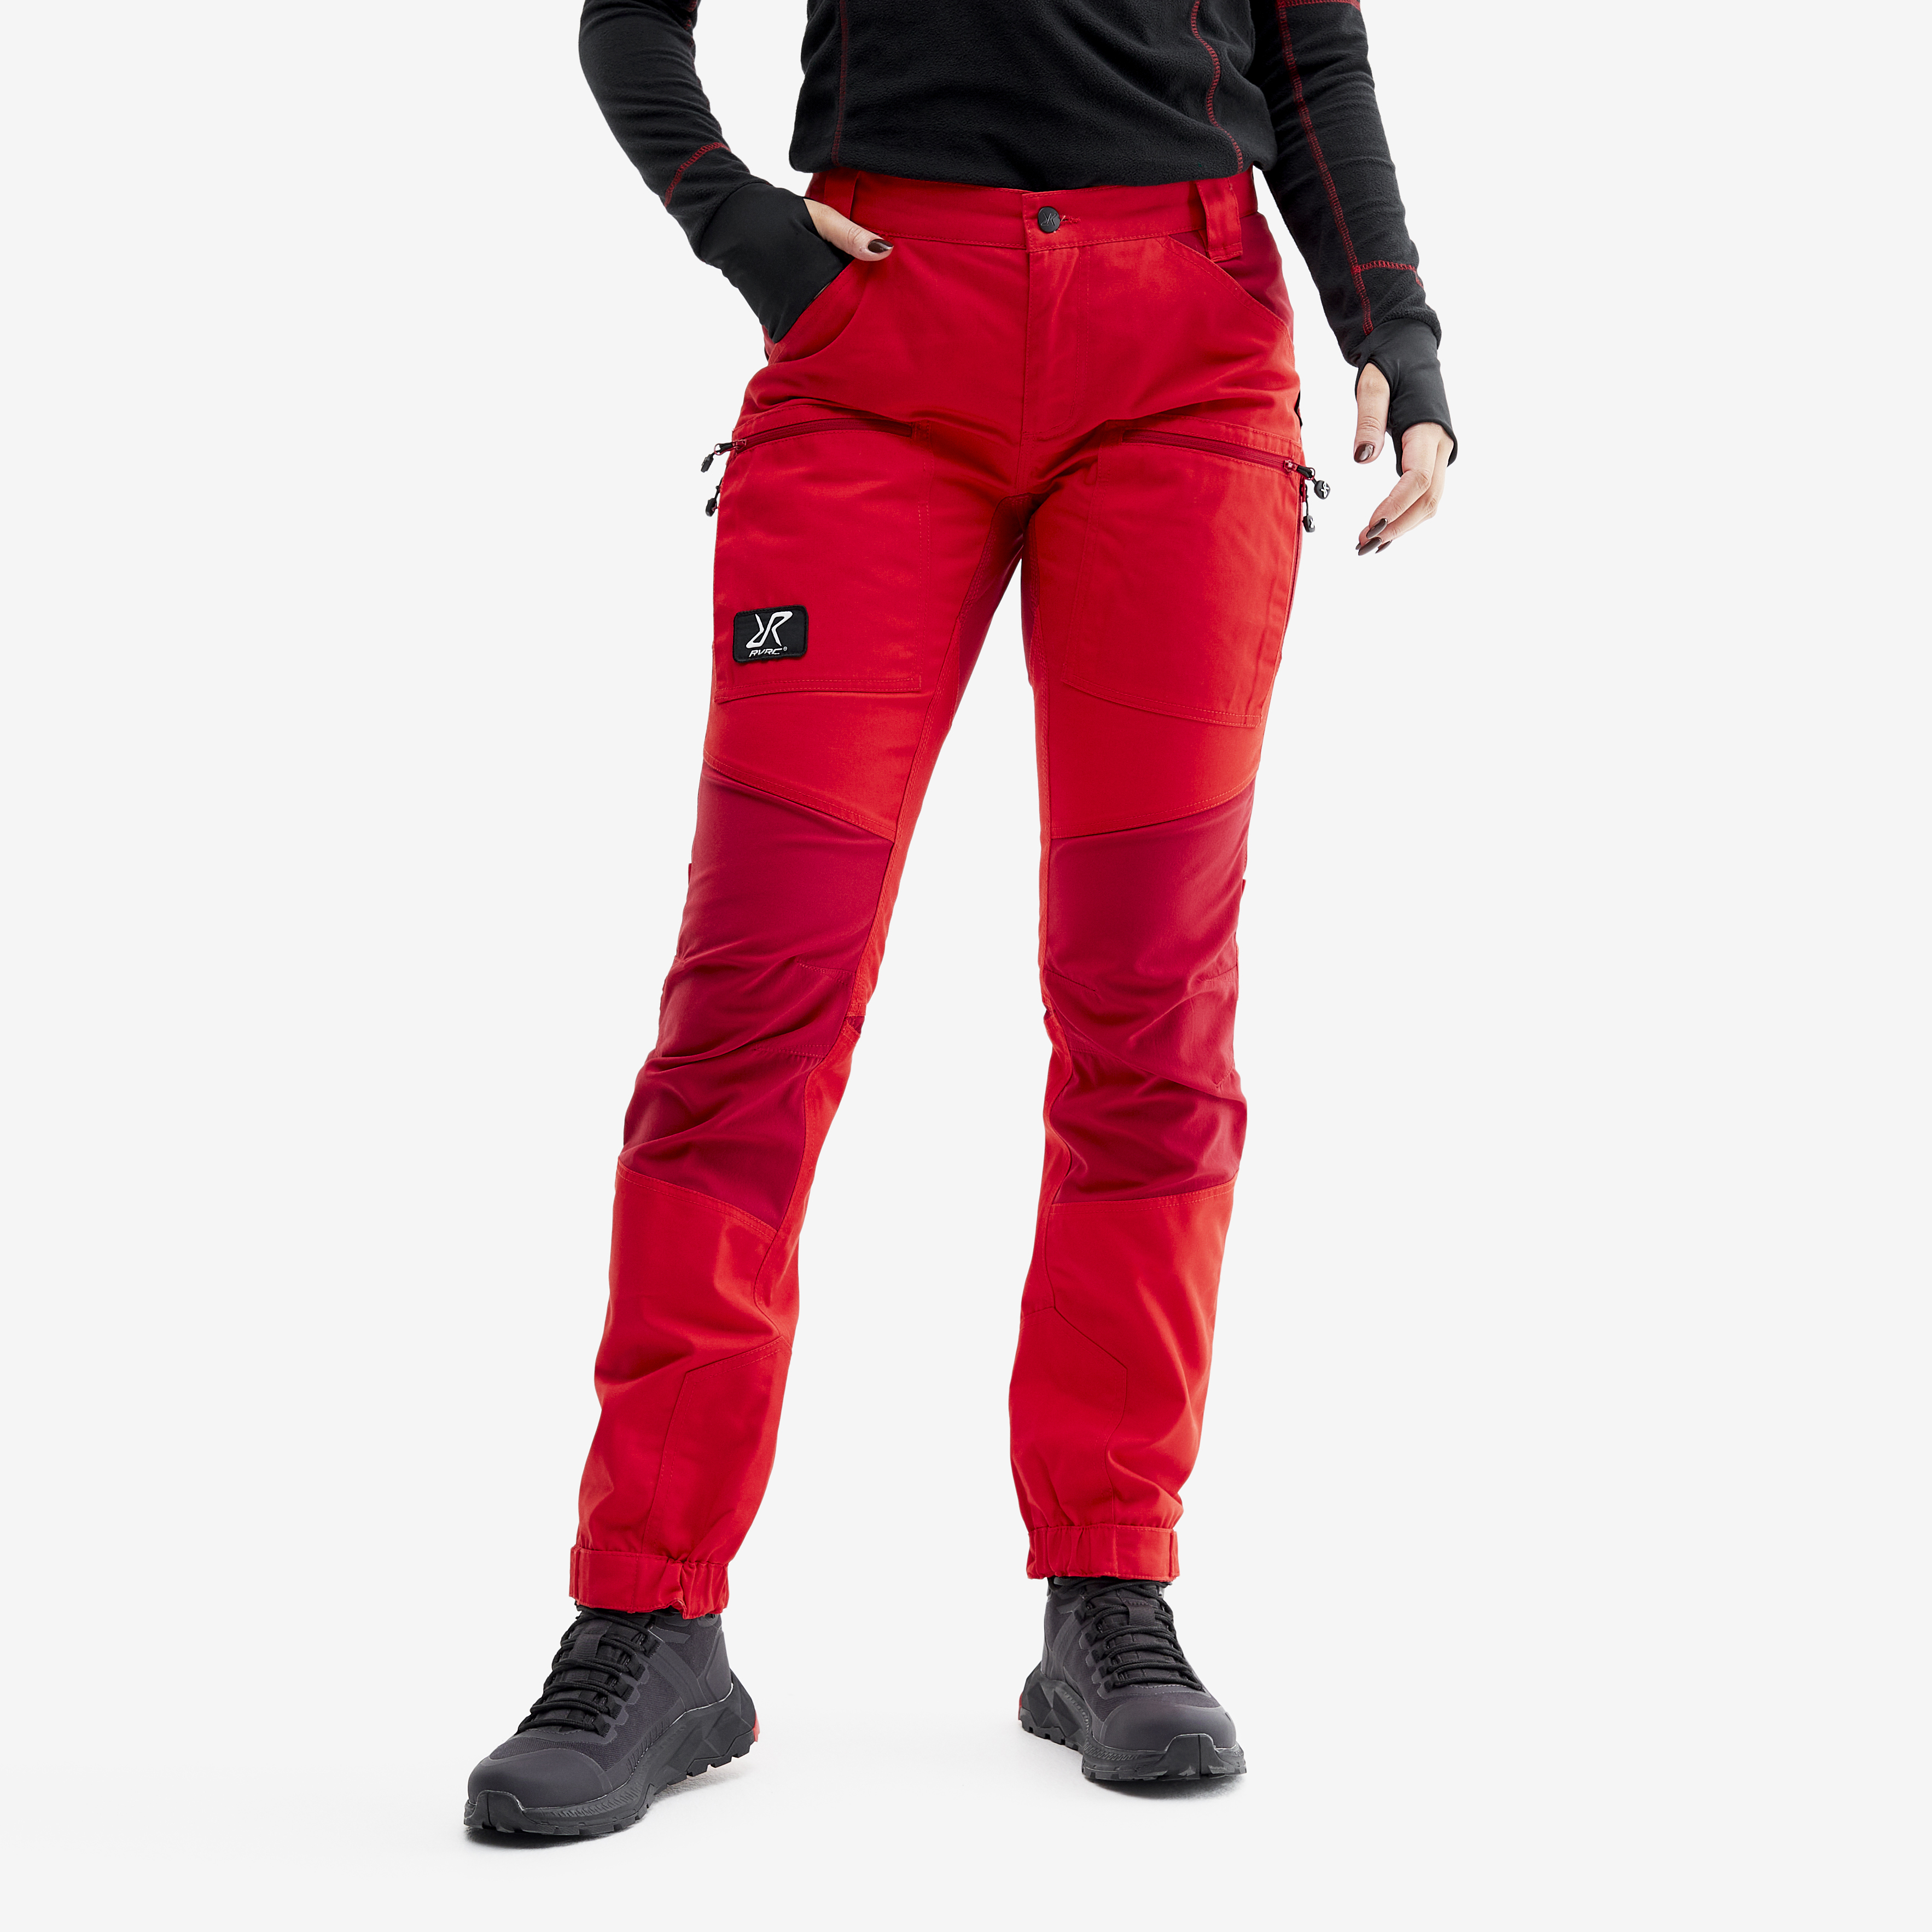 Nordwand Pro Pants Red